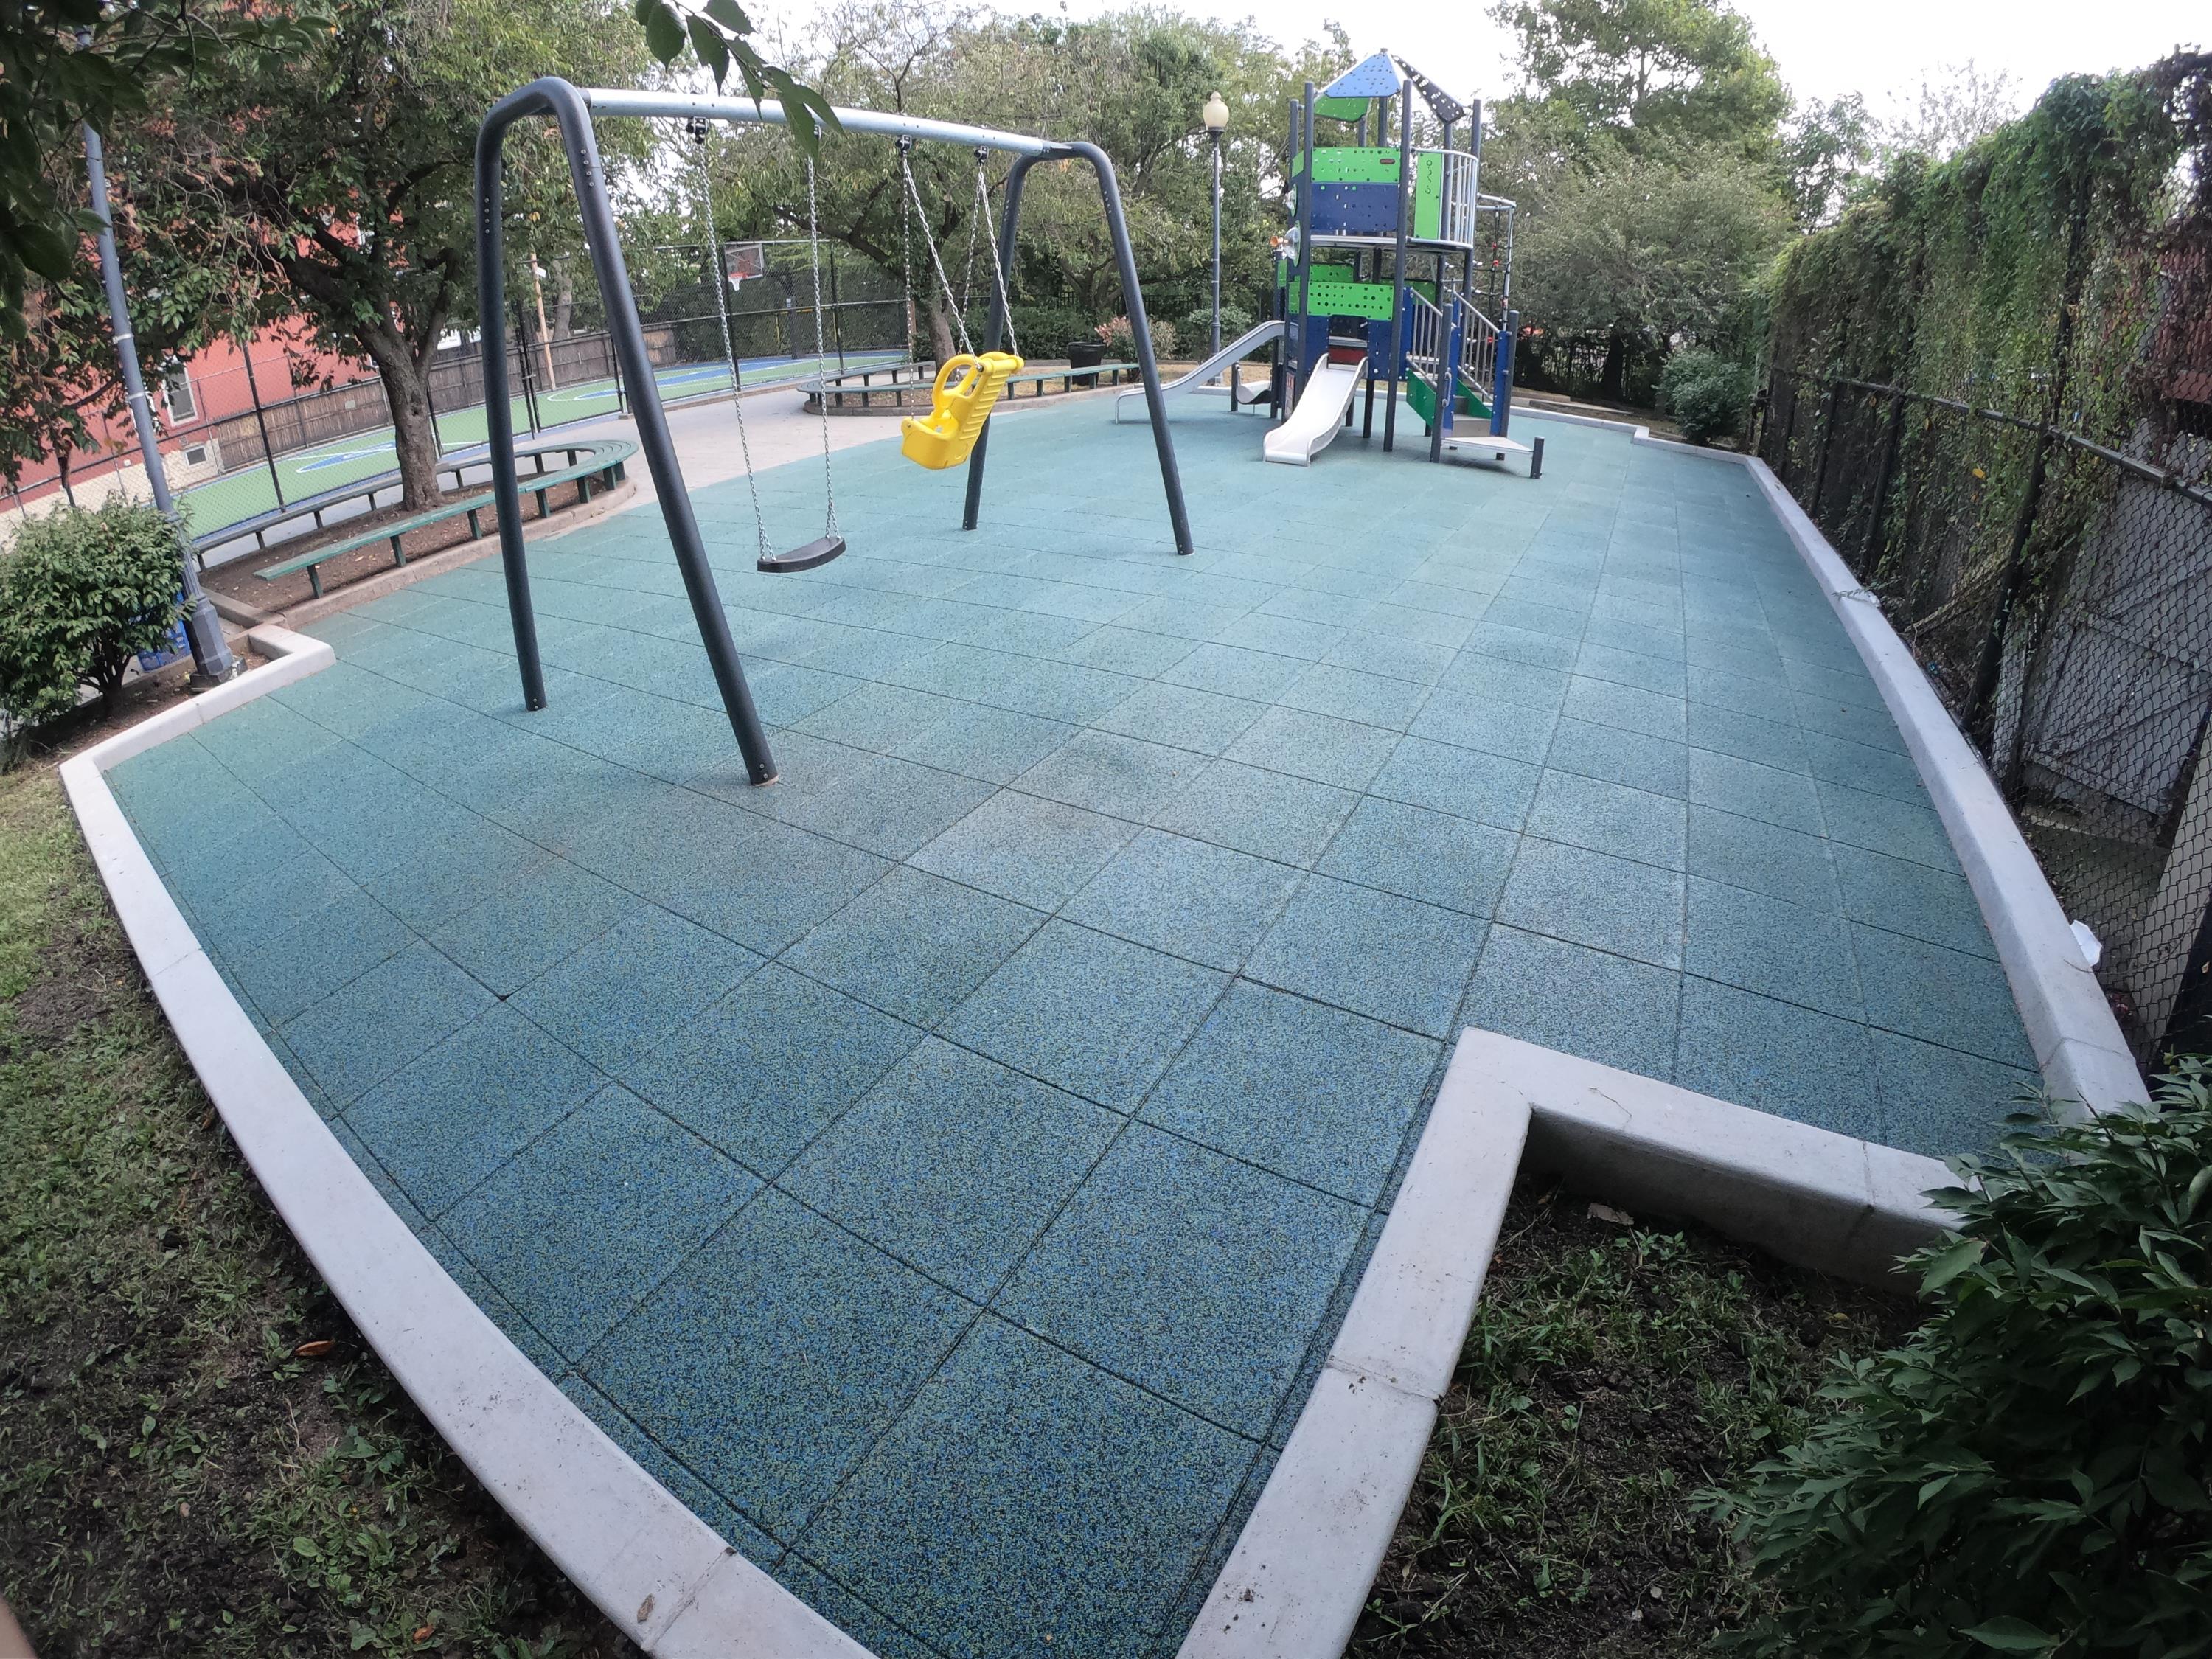 UNITY - Exterior Park Playground Project using 33% Green, 33% Blue, 33% Black